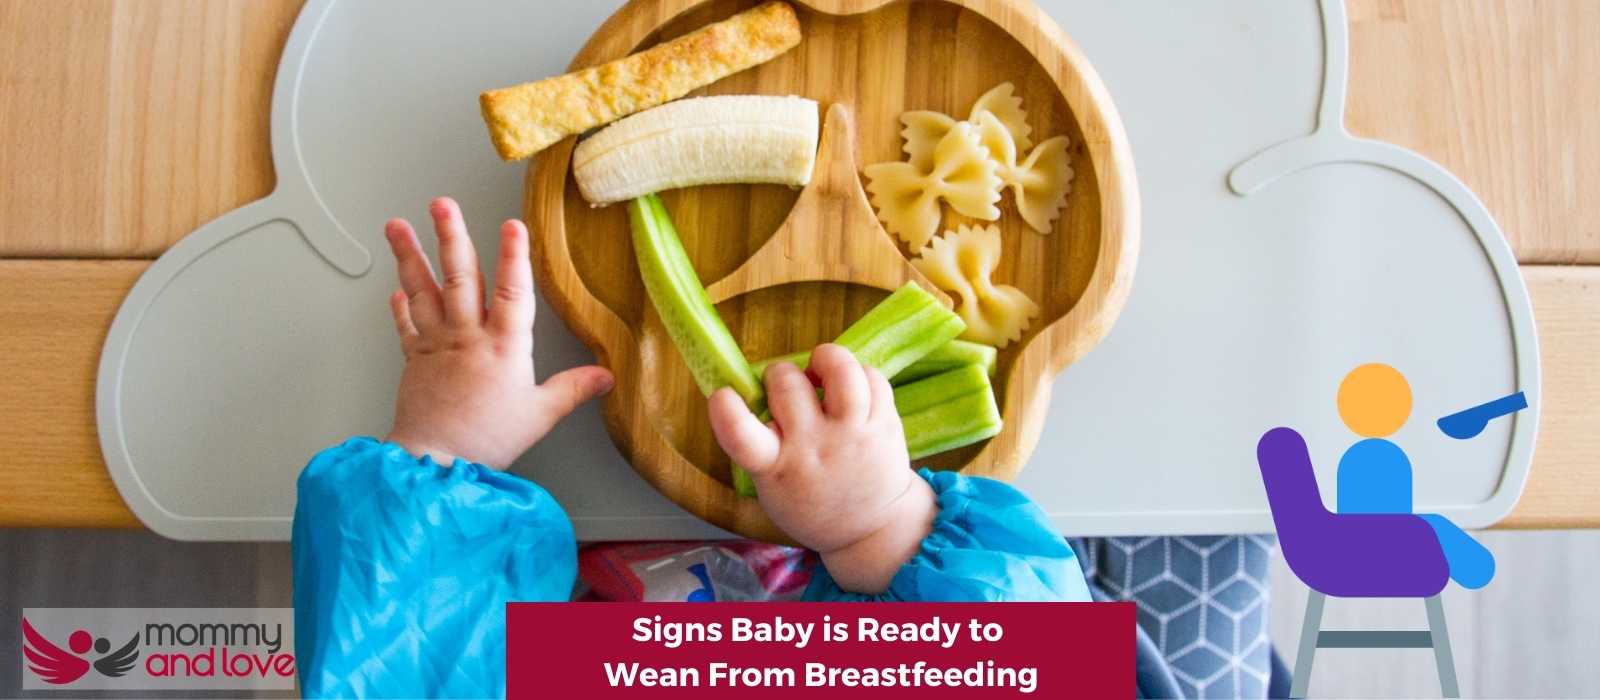 Signs Baby is Ready to Wean From Breastfeeding